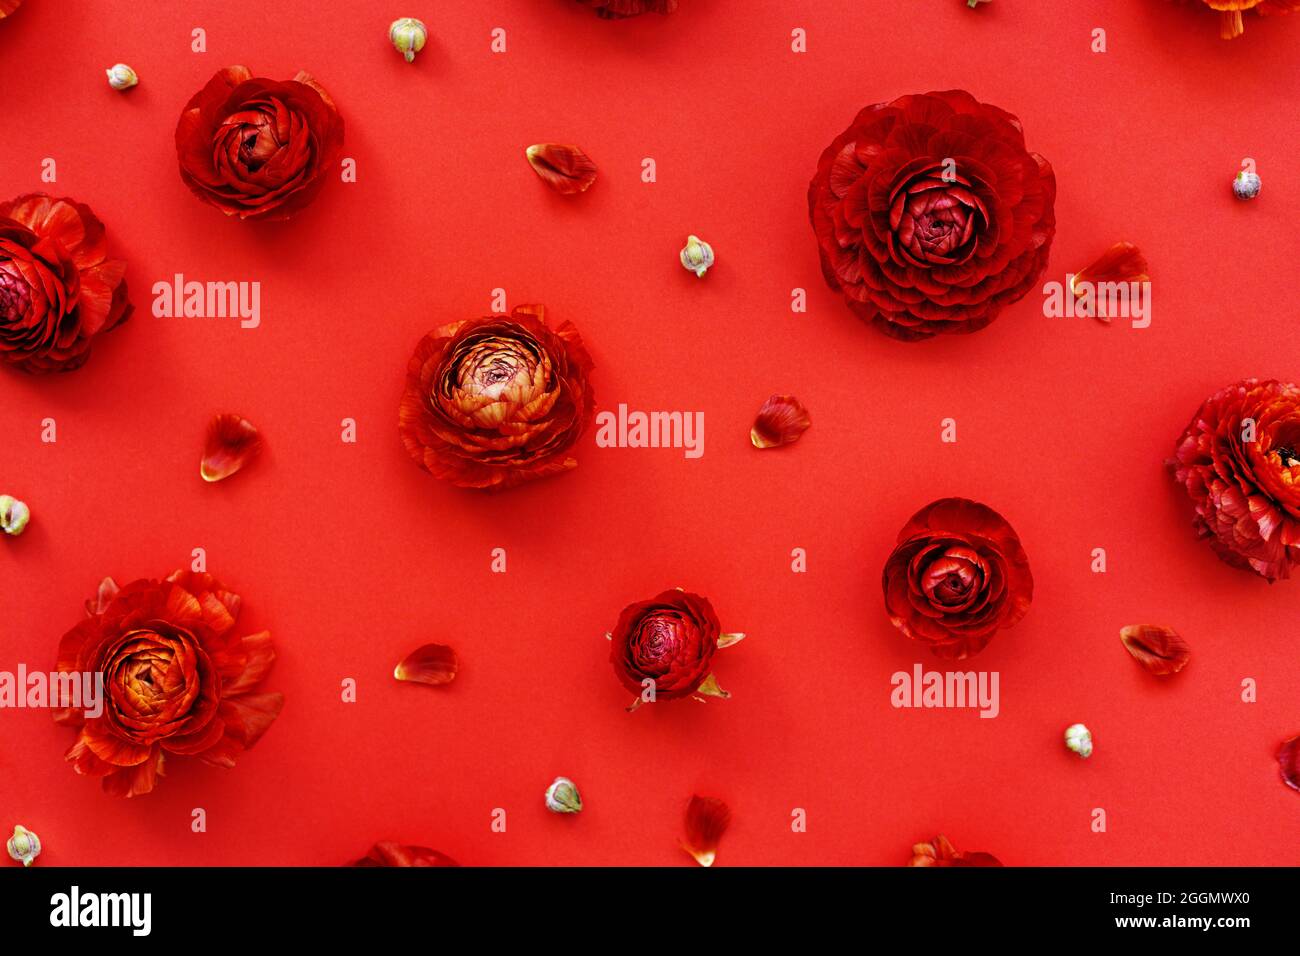 Flowers pattern background. Flower, petals and buds on bright red background. Stock Photo